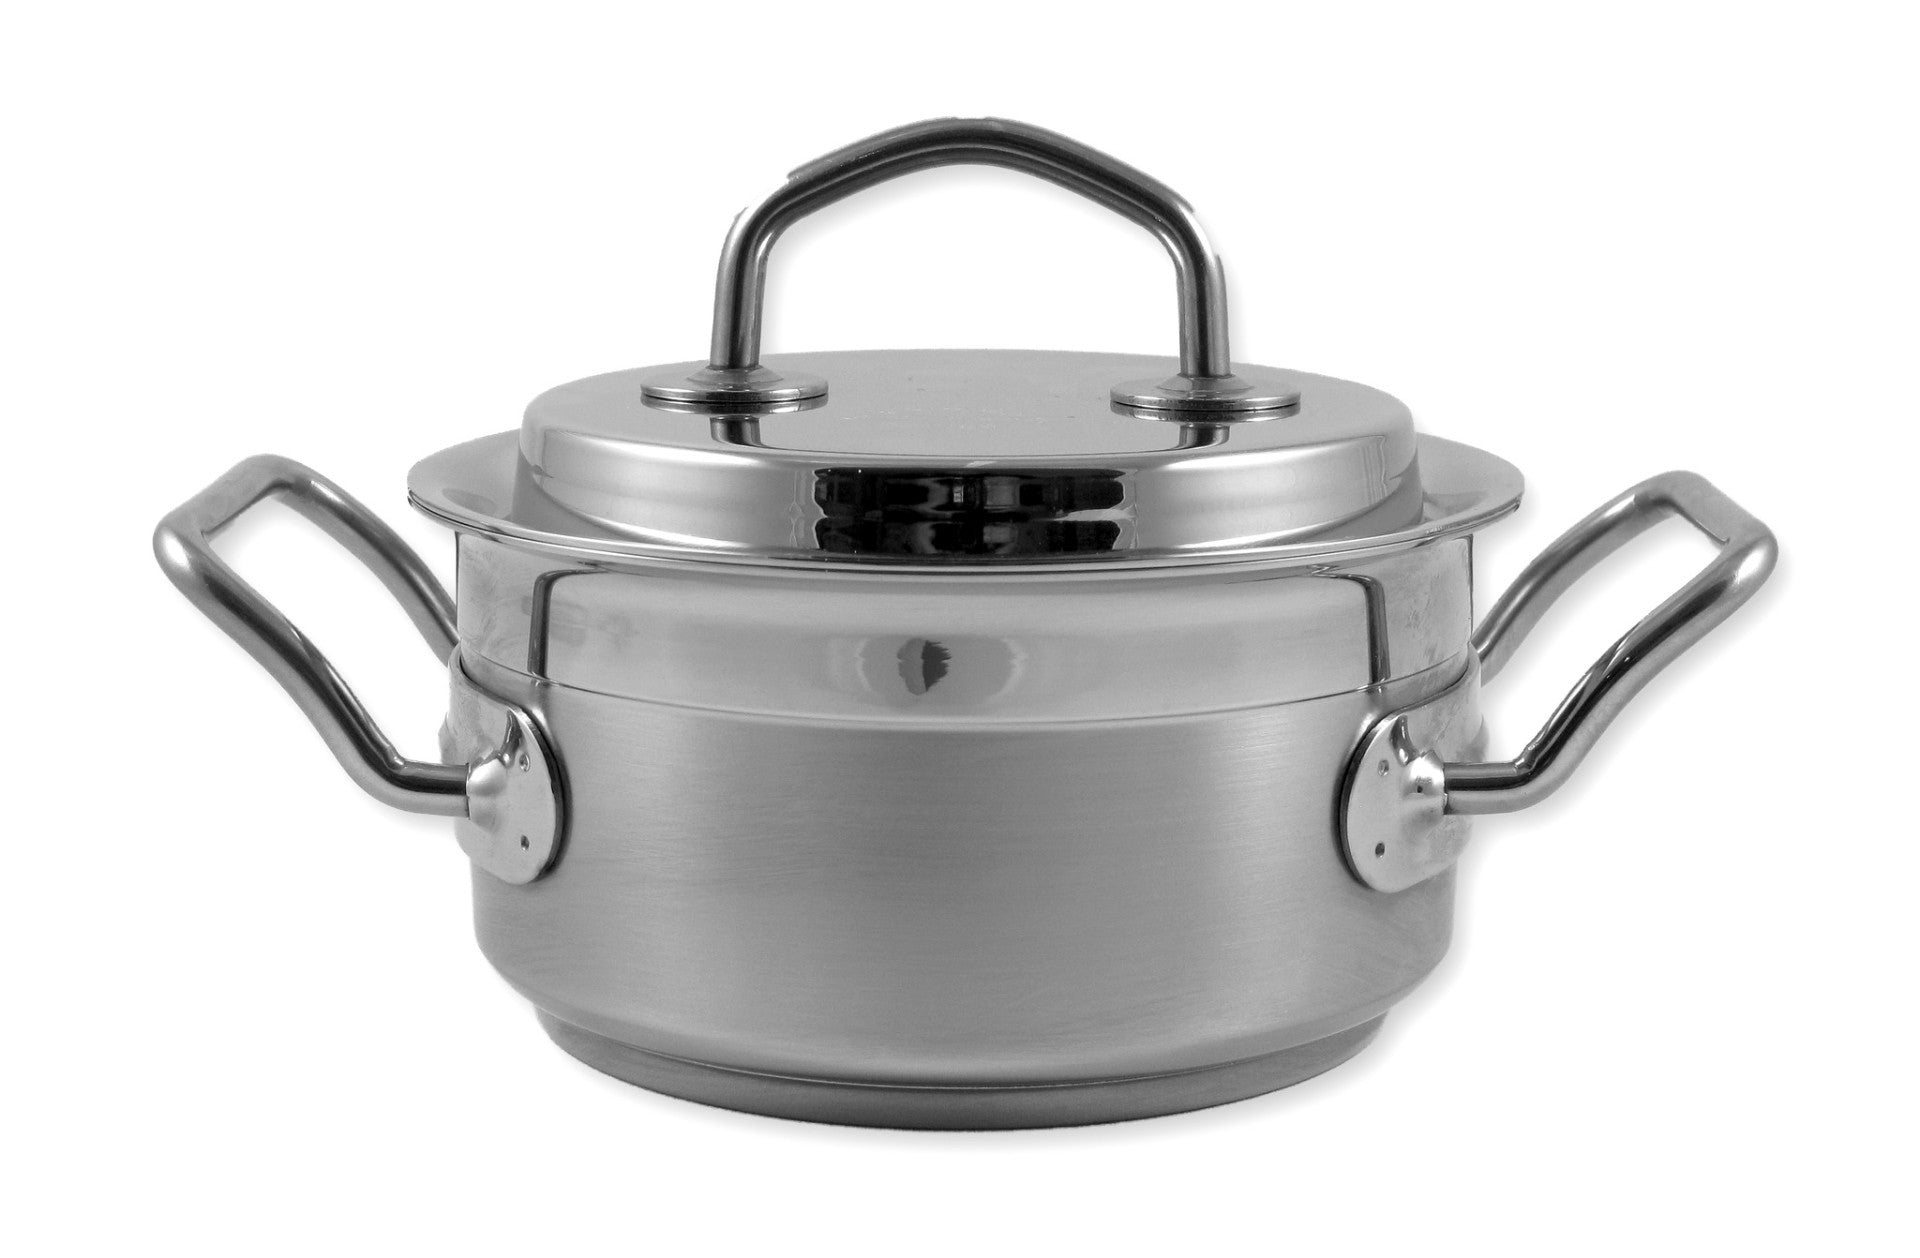 Silga Teknika World's Best Stainless Steel Cookware Saucepan or Casserole with a lid - 1.5 litres